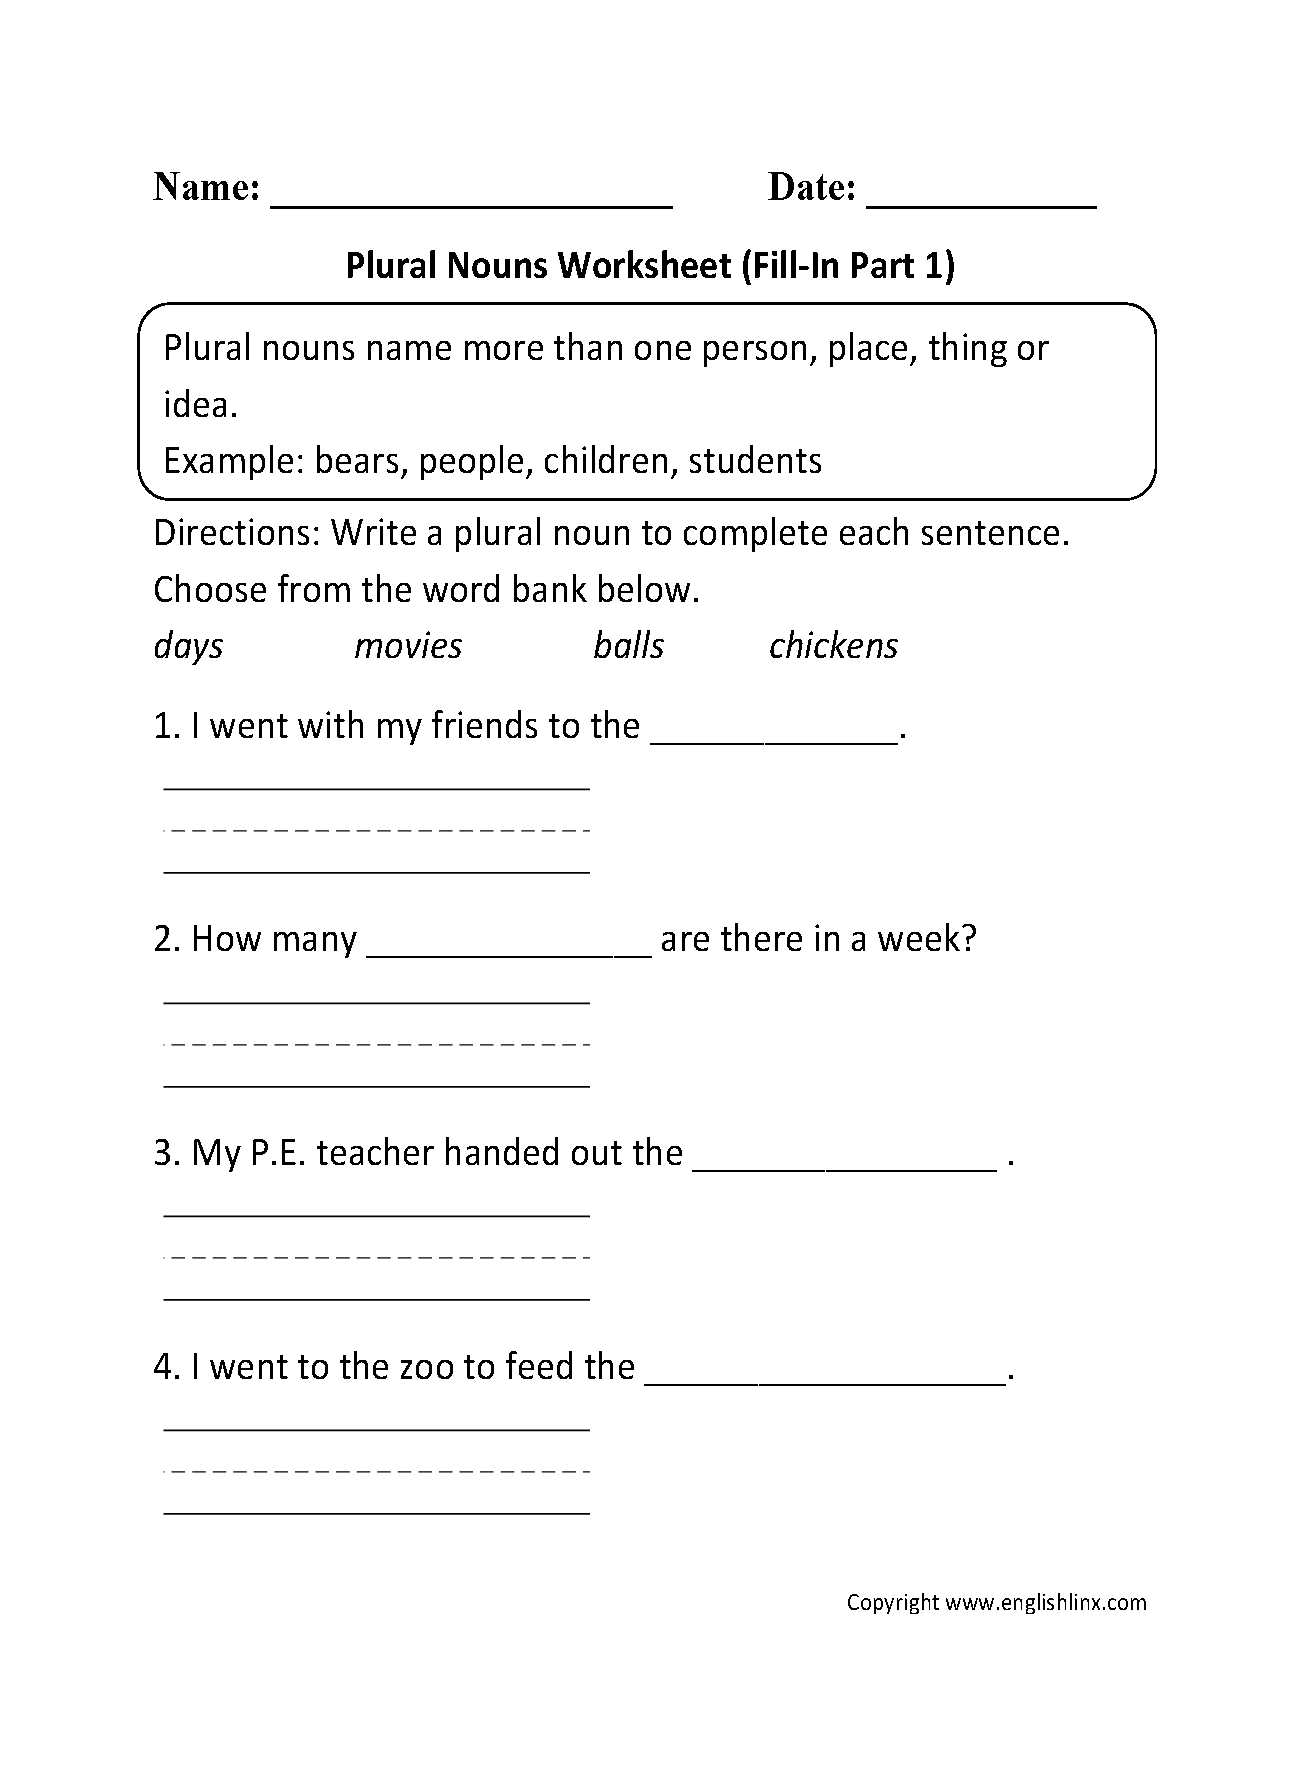 singular-and-plural-nouns-worksheets-fill-in-plural-nouns-worksheet